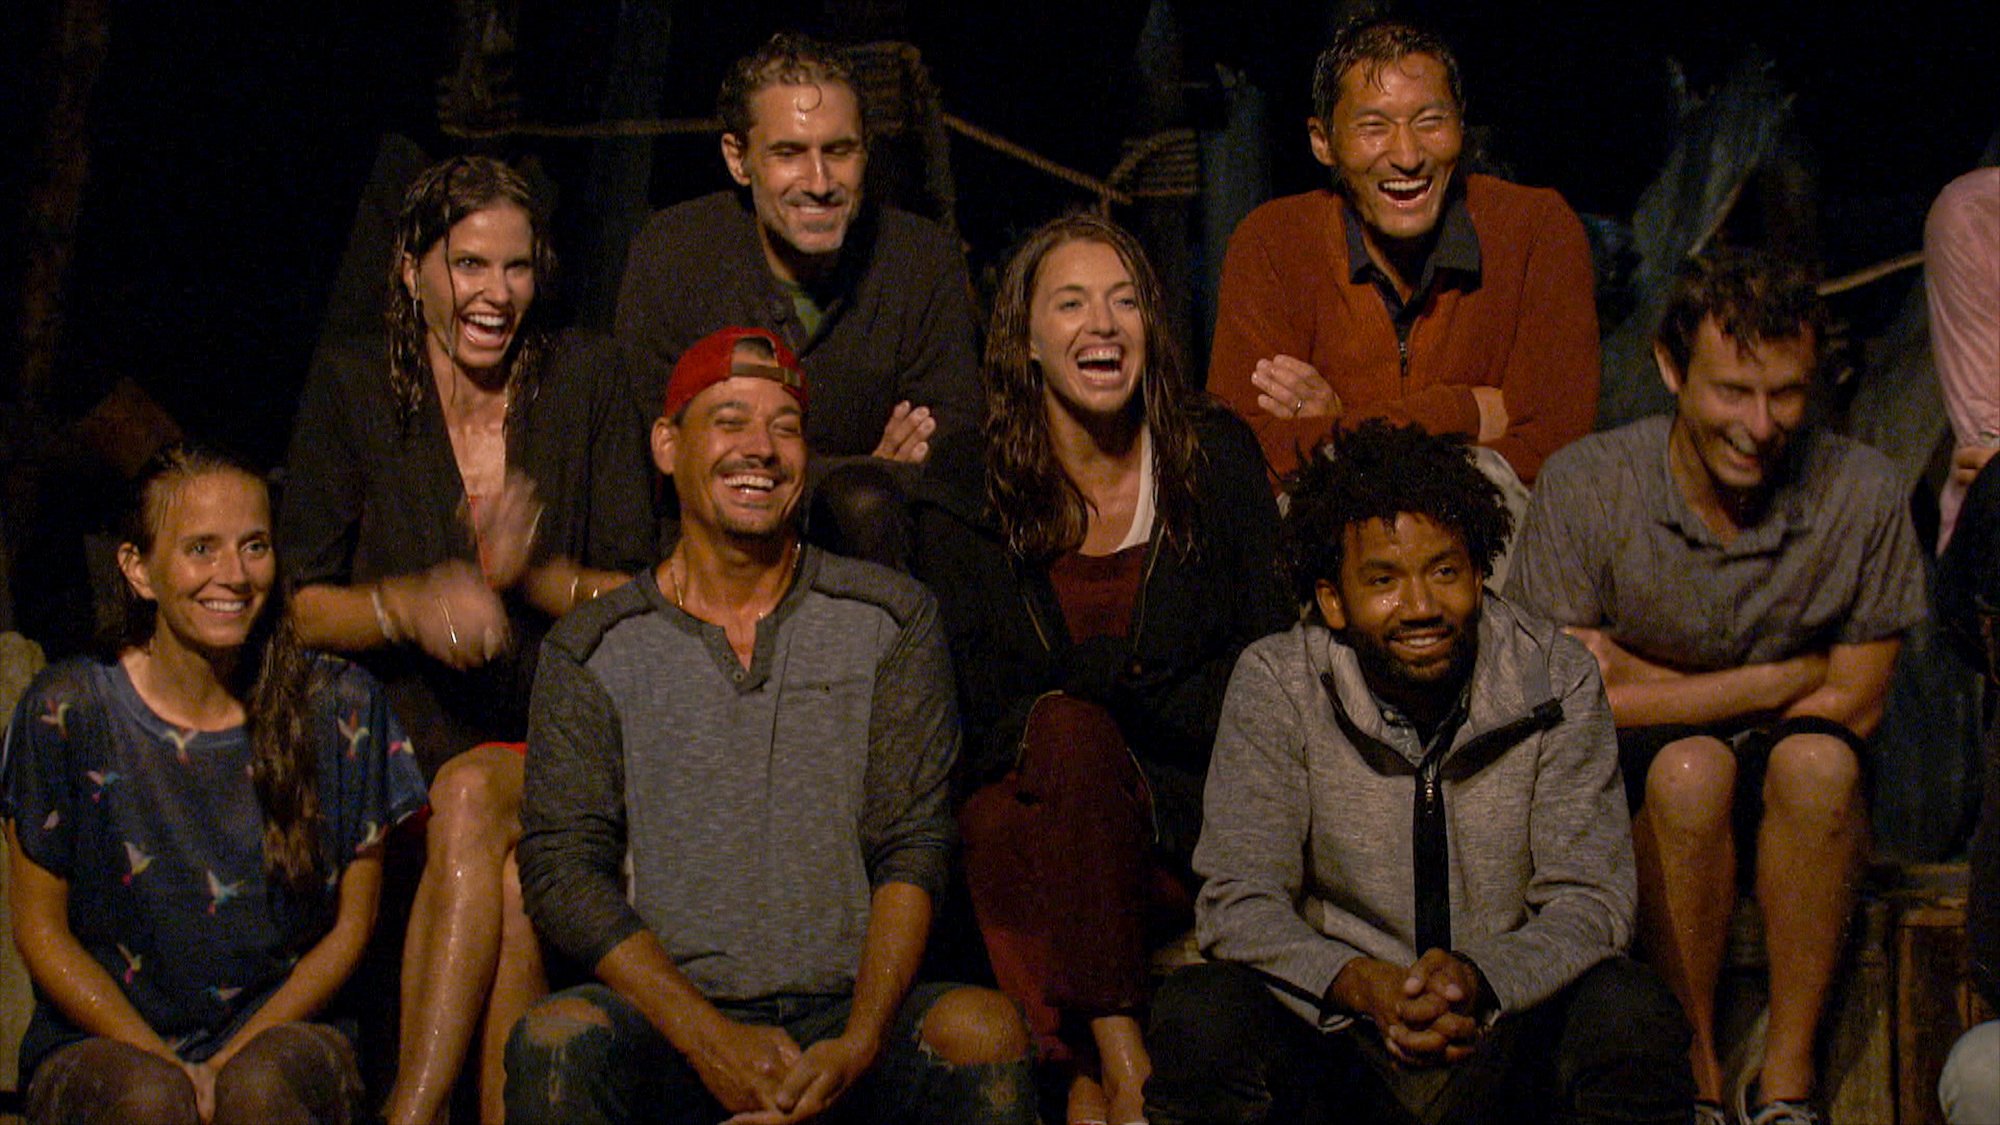 Amber Brkich Mariano, Danni Boatwright, Boston Rob Mariano, Ethan Zohn, Parvati Shallow, Yul Kwon, Wendell Holland and Adam Klein laughing at a tribal council